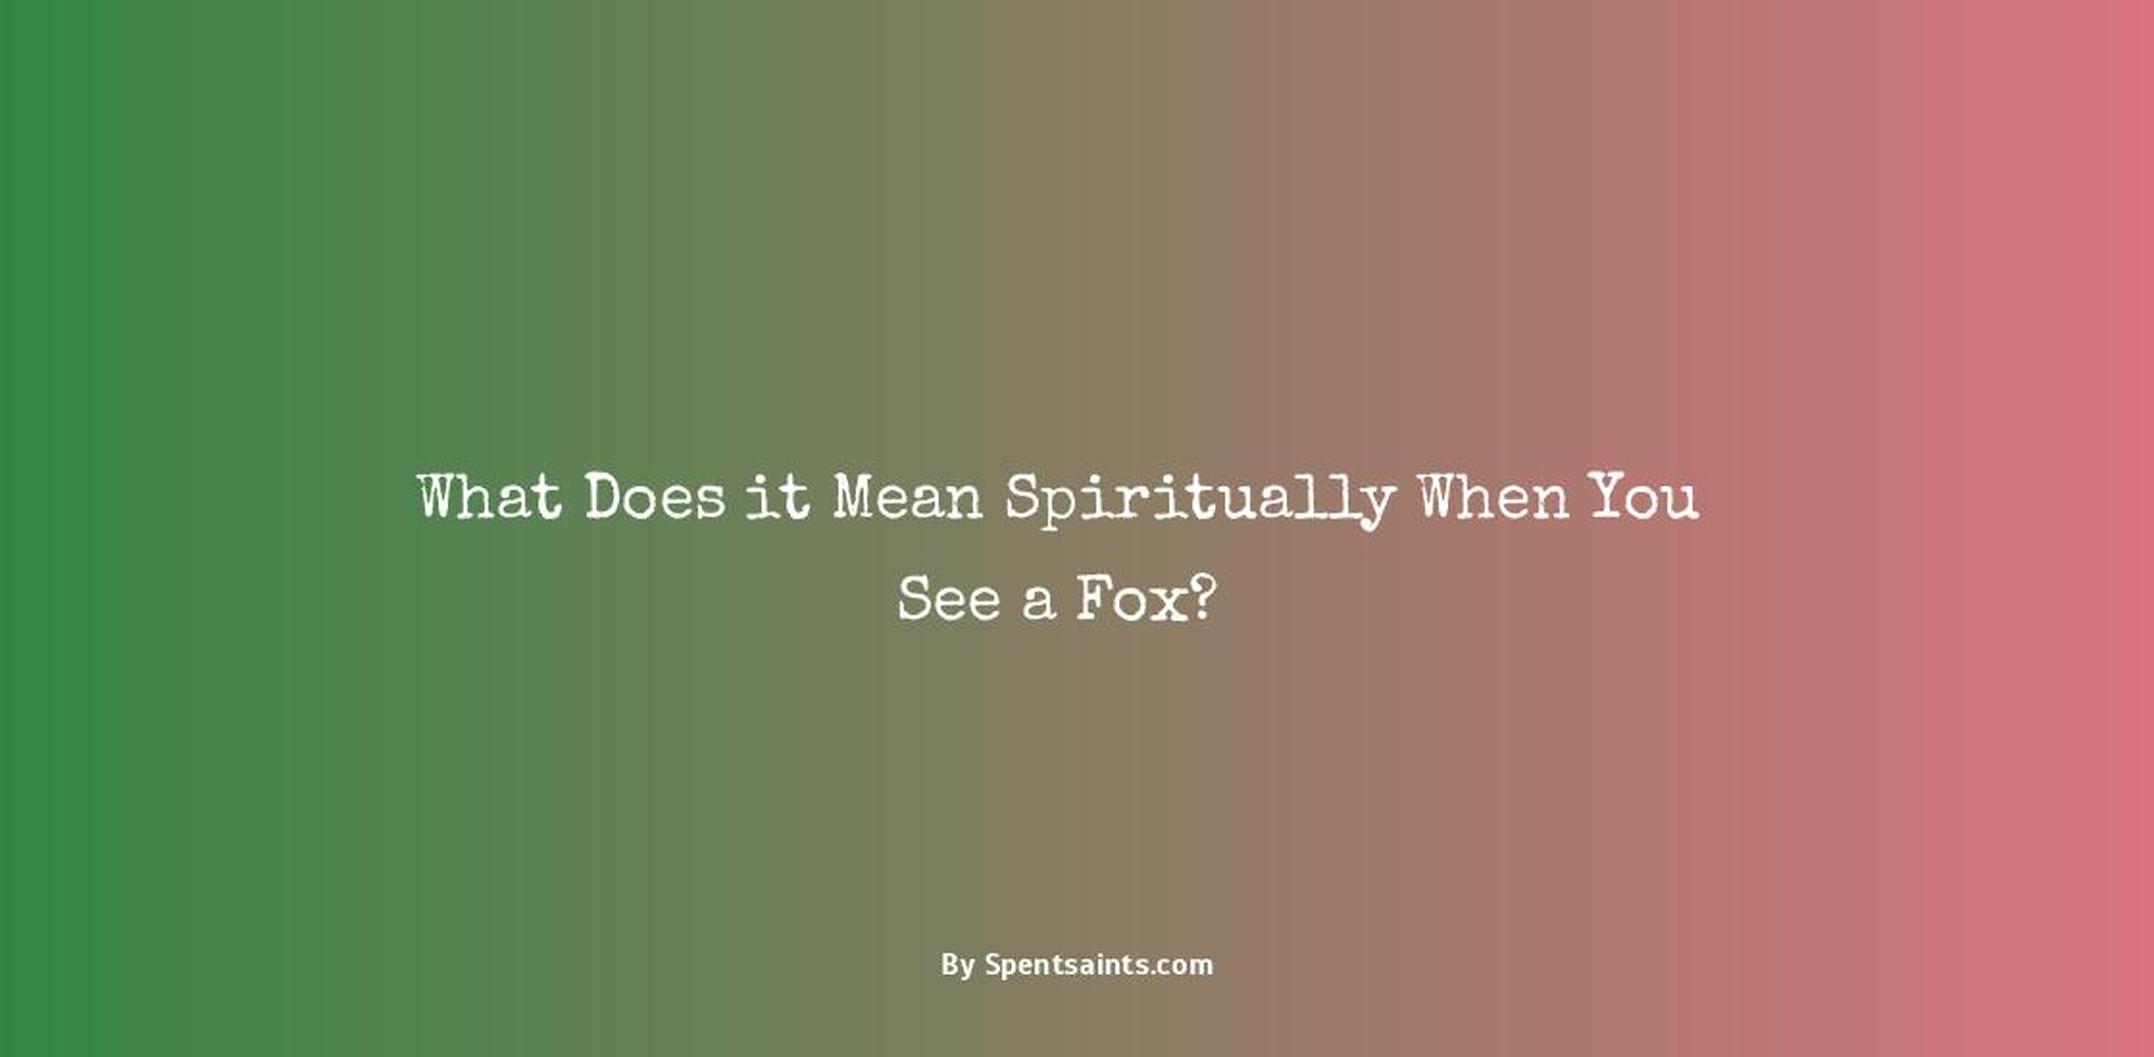 meaning of seeing a fox